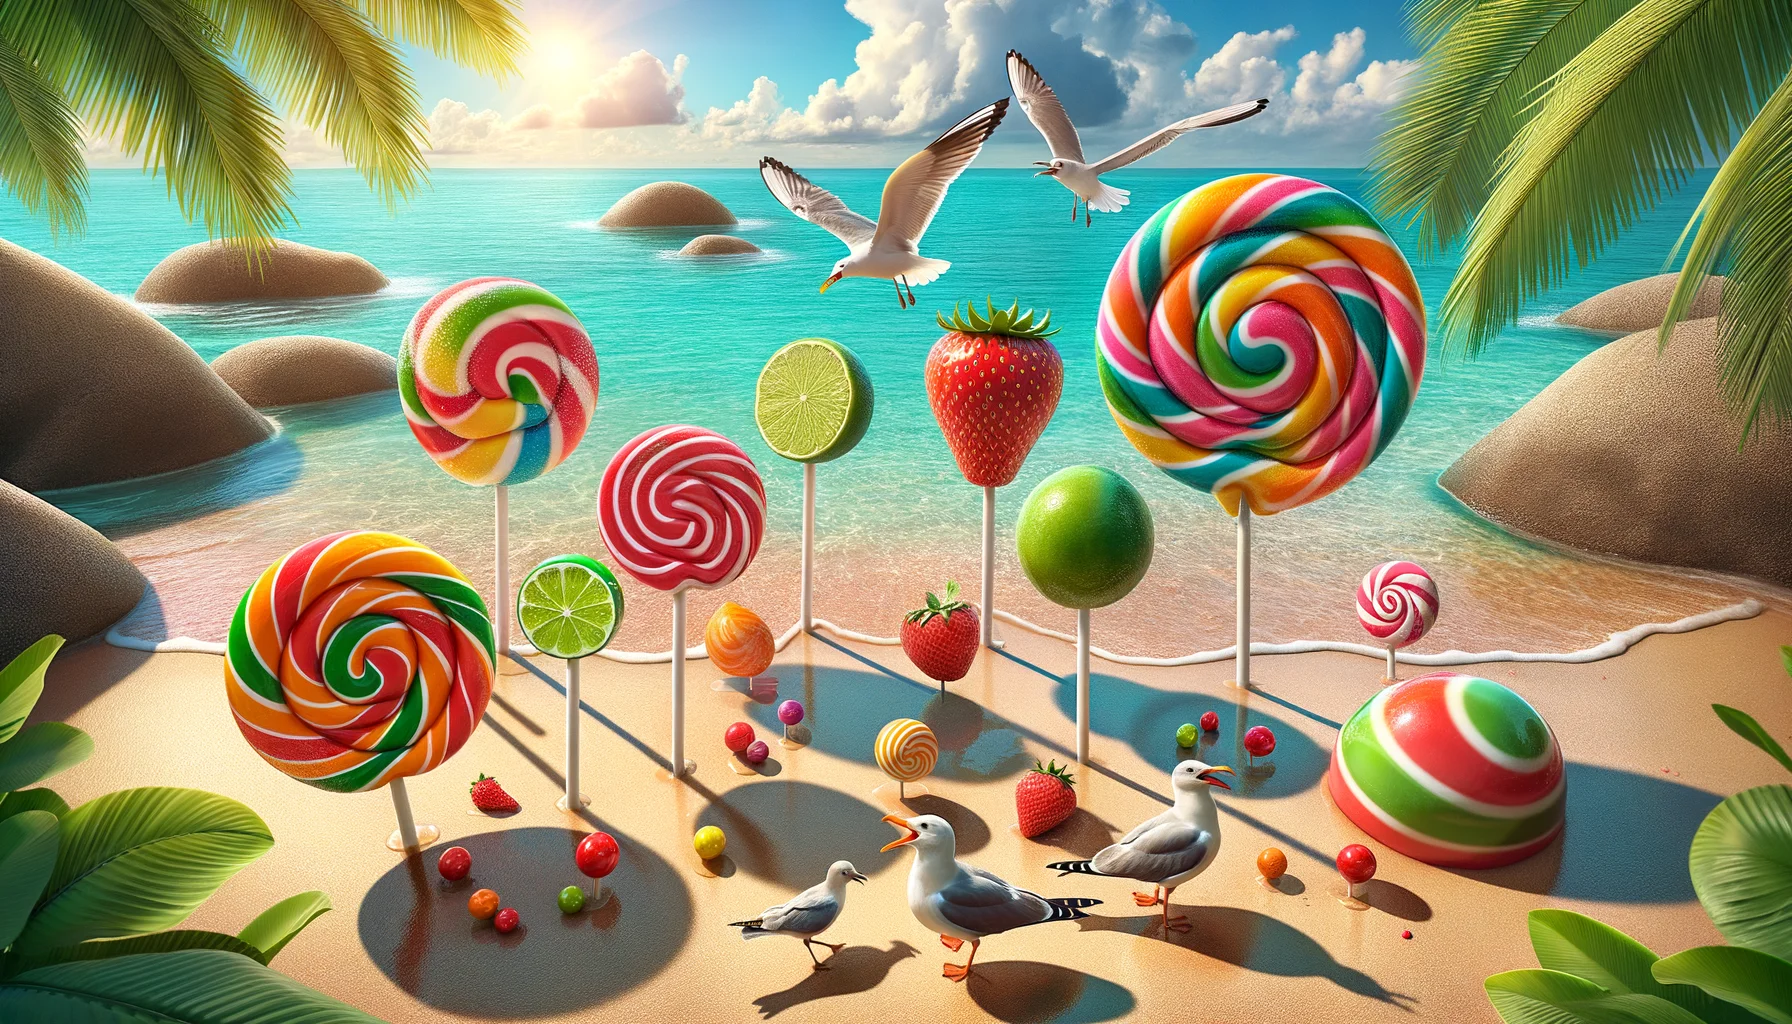 Imagine a comical and realistic scene experienced during a sweltering summer day. Multiple oversized fruit-flavored lollipops, with delicious strawberry, tangy lime, and exotic mango flavors, are scattered carelessly throughout a beautiful tropical beach. There's one stuck unevenly in the sand, casting long candy-striped shadows. A couple of pesky seagulls are humorously attempting to peck at another one. A refreshing sea breeze rustles the palm fronds and the sun casts brilliant reflections off clear turquoise waters, heightening the festivity of the scene. All of this creates an inviting, tasty and laugh-inducing image of a perfect summer day.